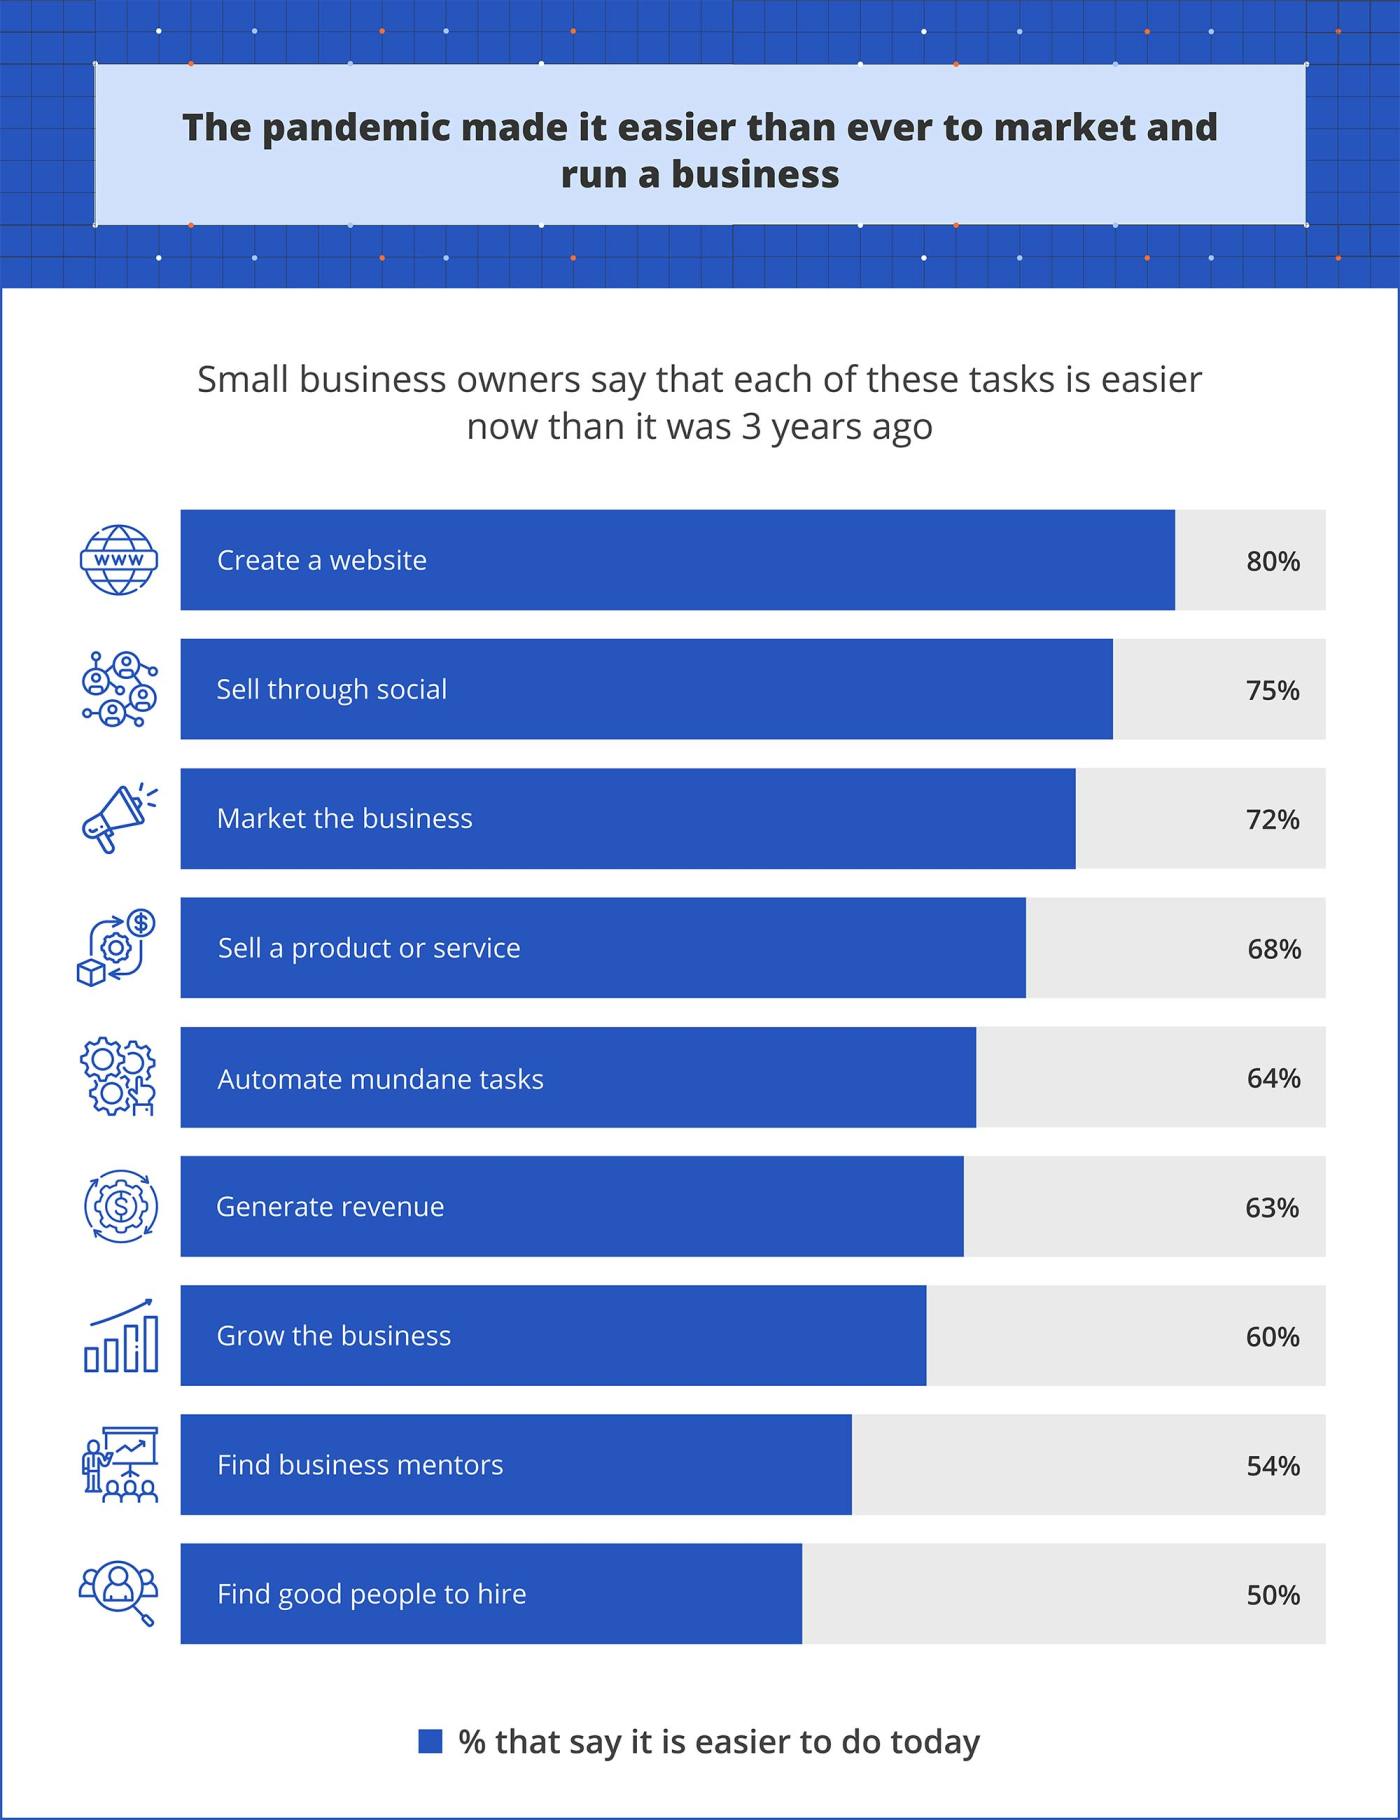 A bar graph showing the top things that business owners say are easier now than 3 years ago (top choices are creating a website, selling through social, and marketing the business)